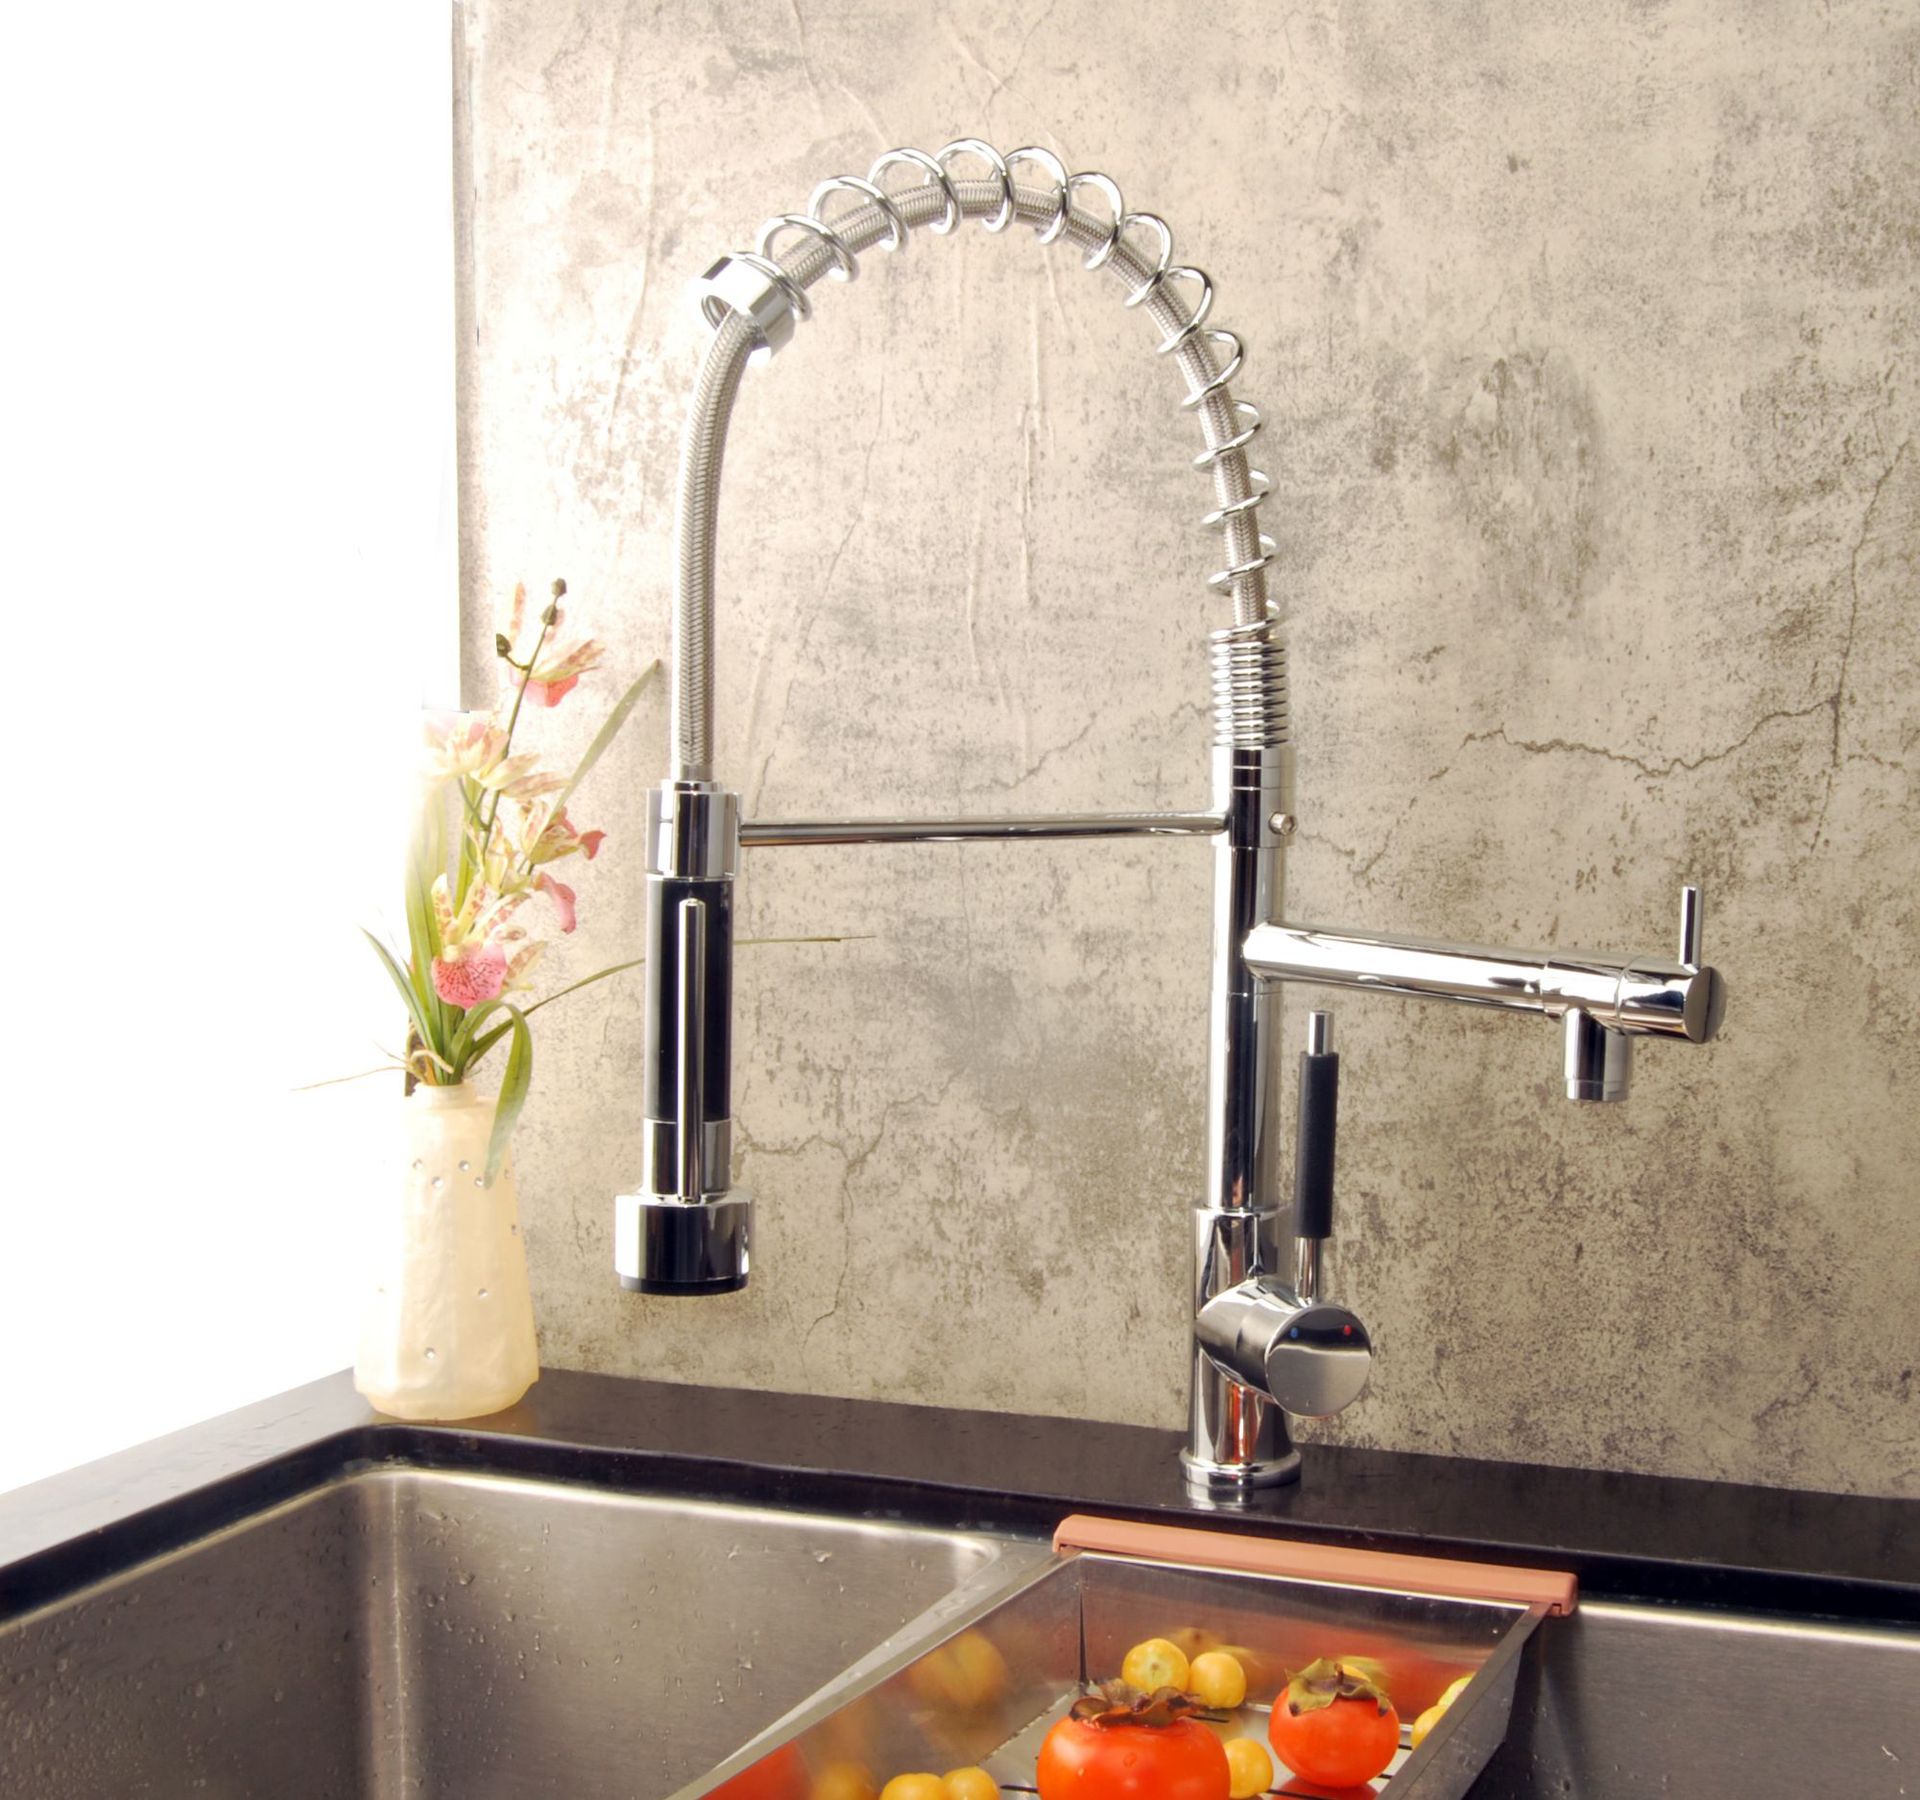 Retractable Stainless Steel 7.2 Million-Way Kitchen Basin Faucet Pull-out Spring Kitchen Faucet JA-1001 Water Tap